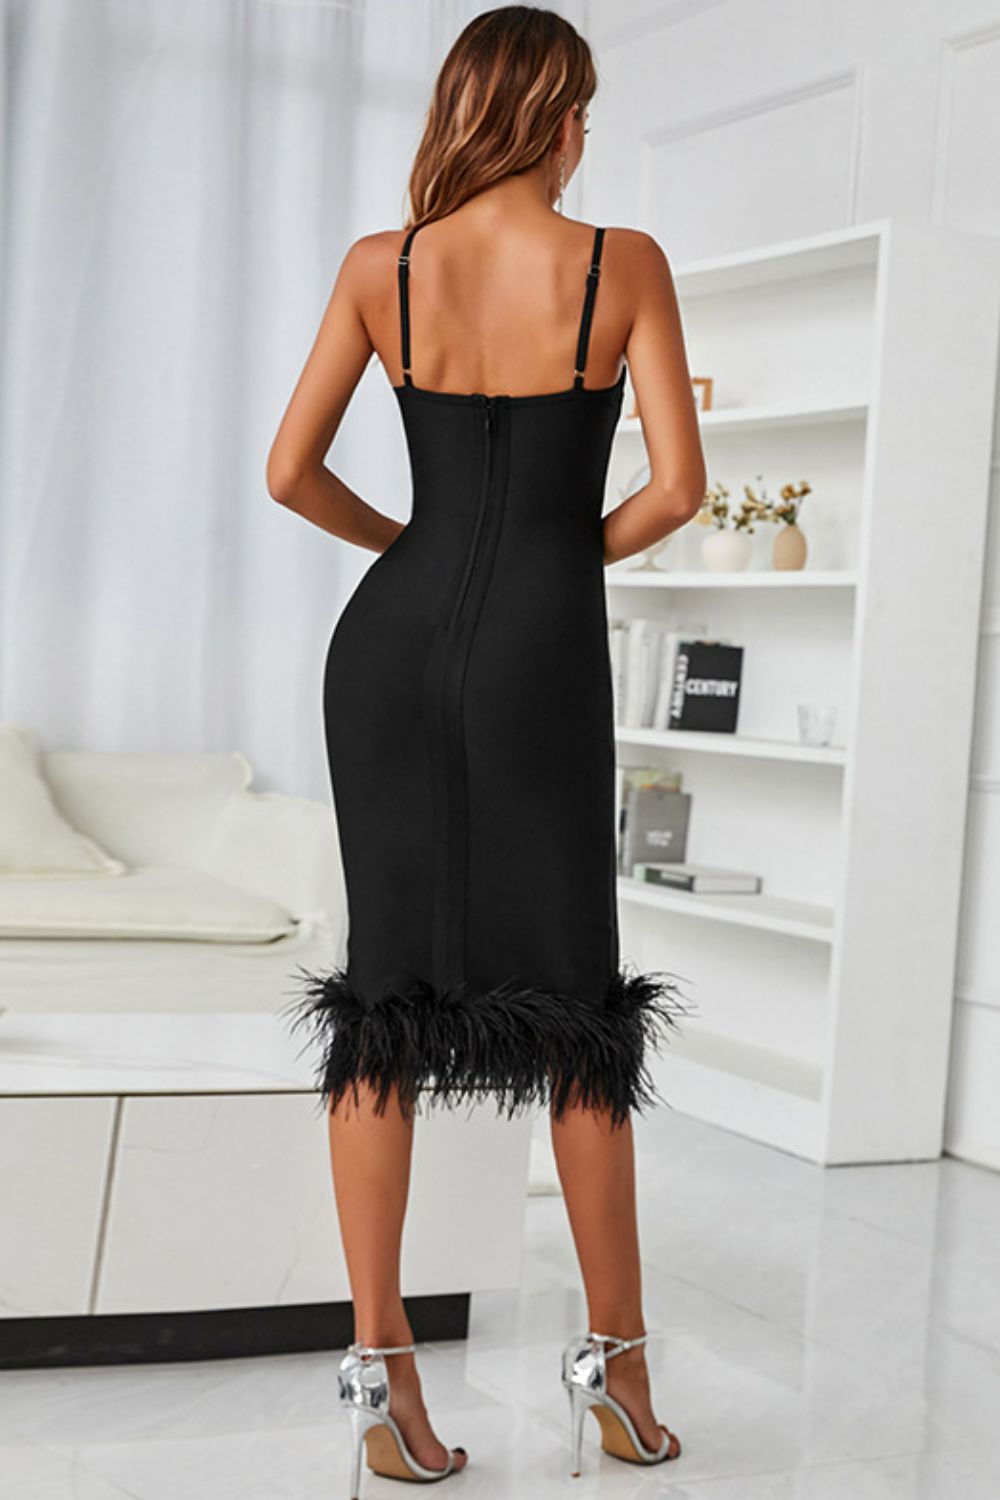 Strappy Feather Bodycon Dress